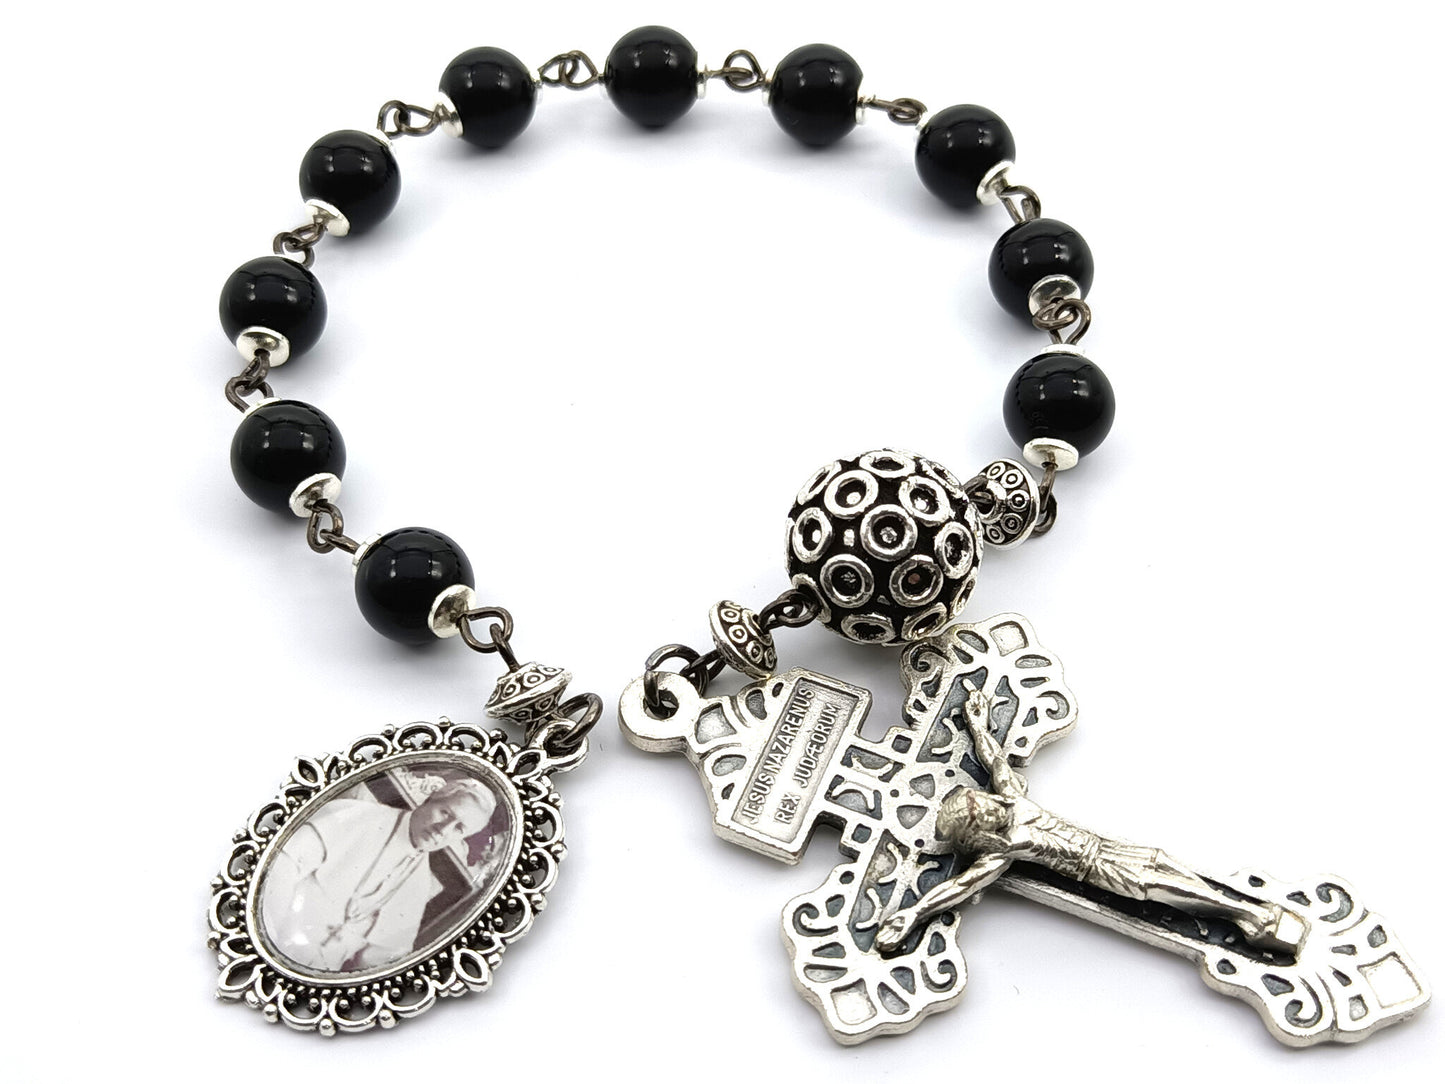 Saint Pius X unique rosary beads single decade rosary with onyx beads, silver Pardon crucifix, pater bead and picture medal.